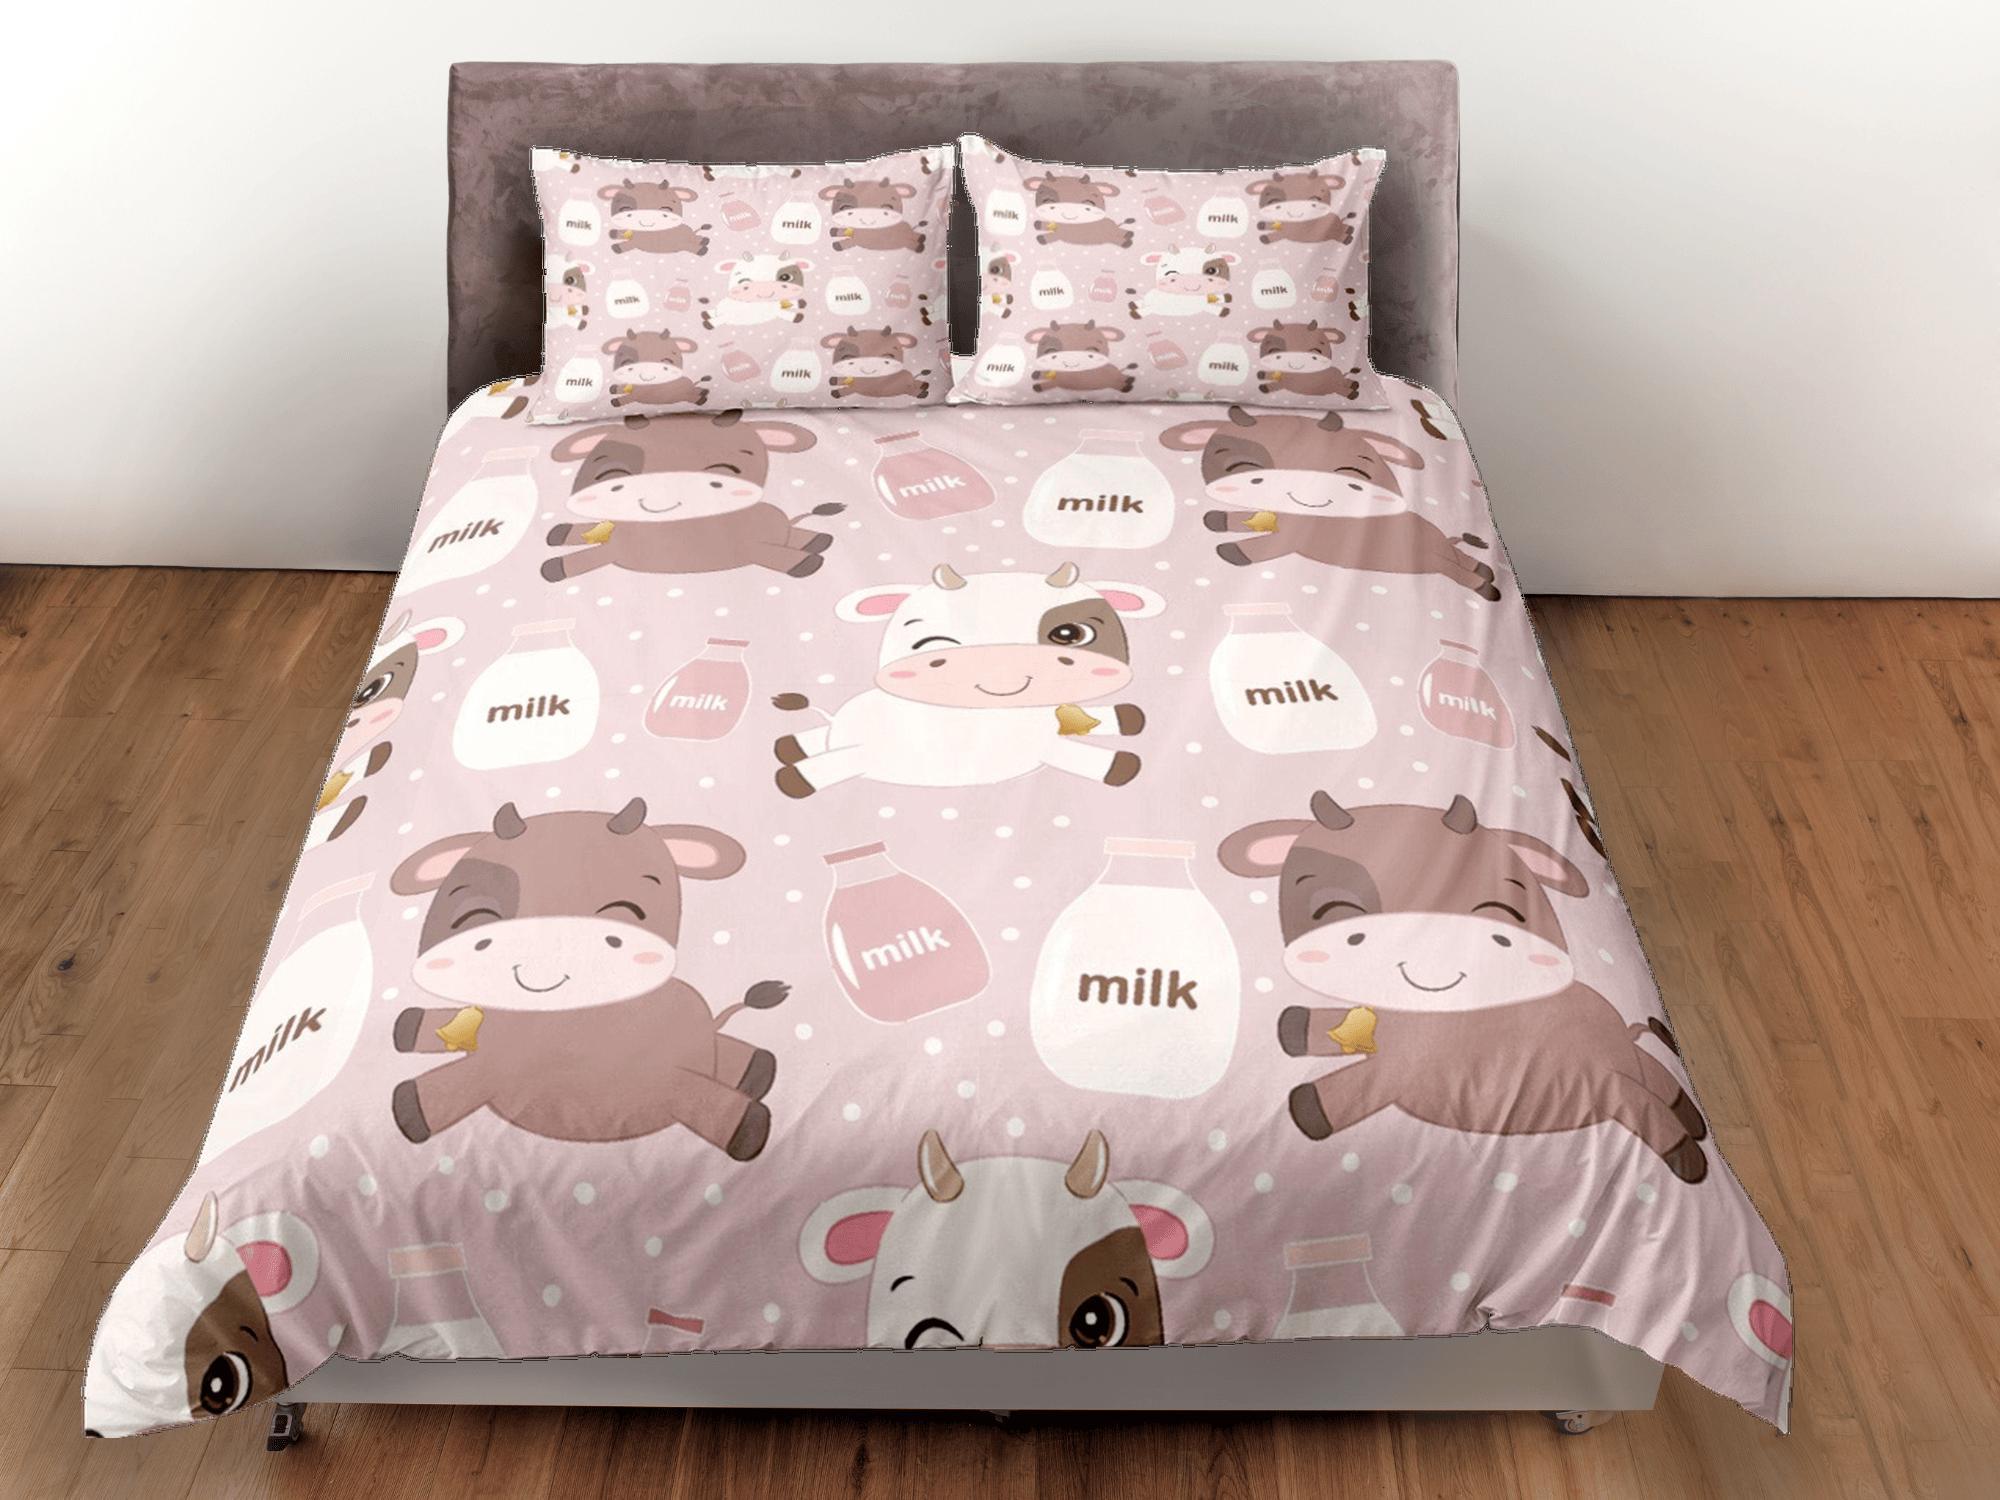 daintyduvet Cute Cow Pink Duvet Cover Set Colorful Bedspread, Kids Full Bedding Set with Pillowcase, King Duvet Cover Queen Comforter Cover